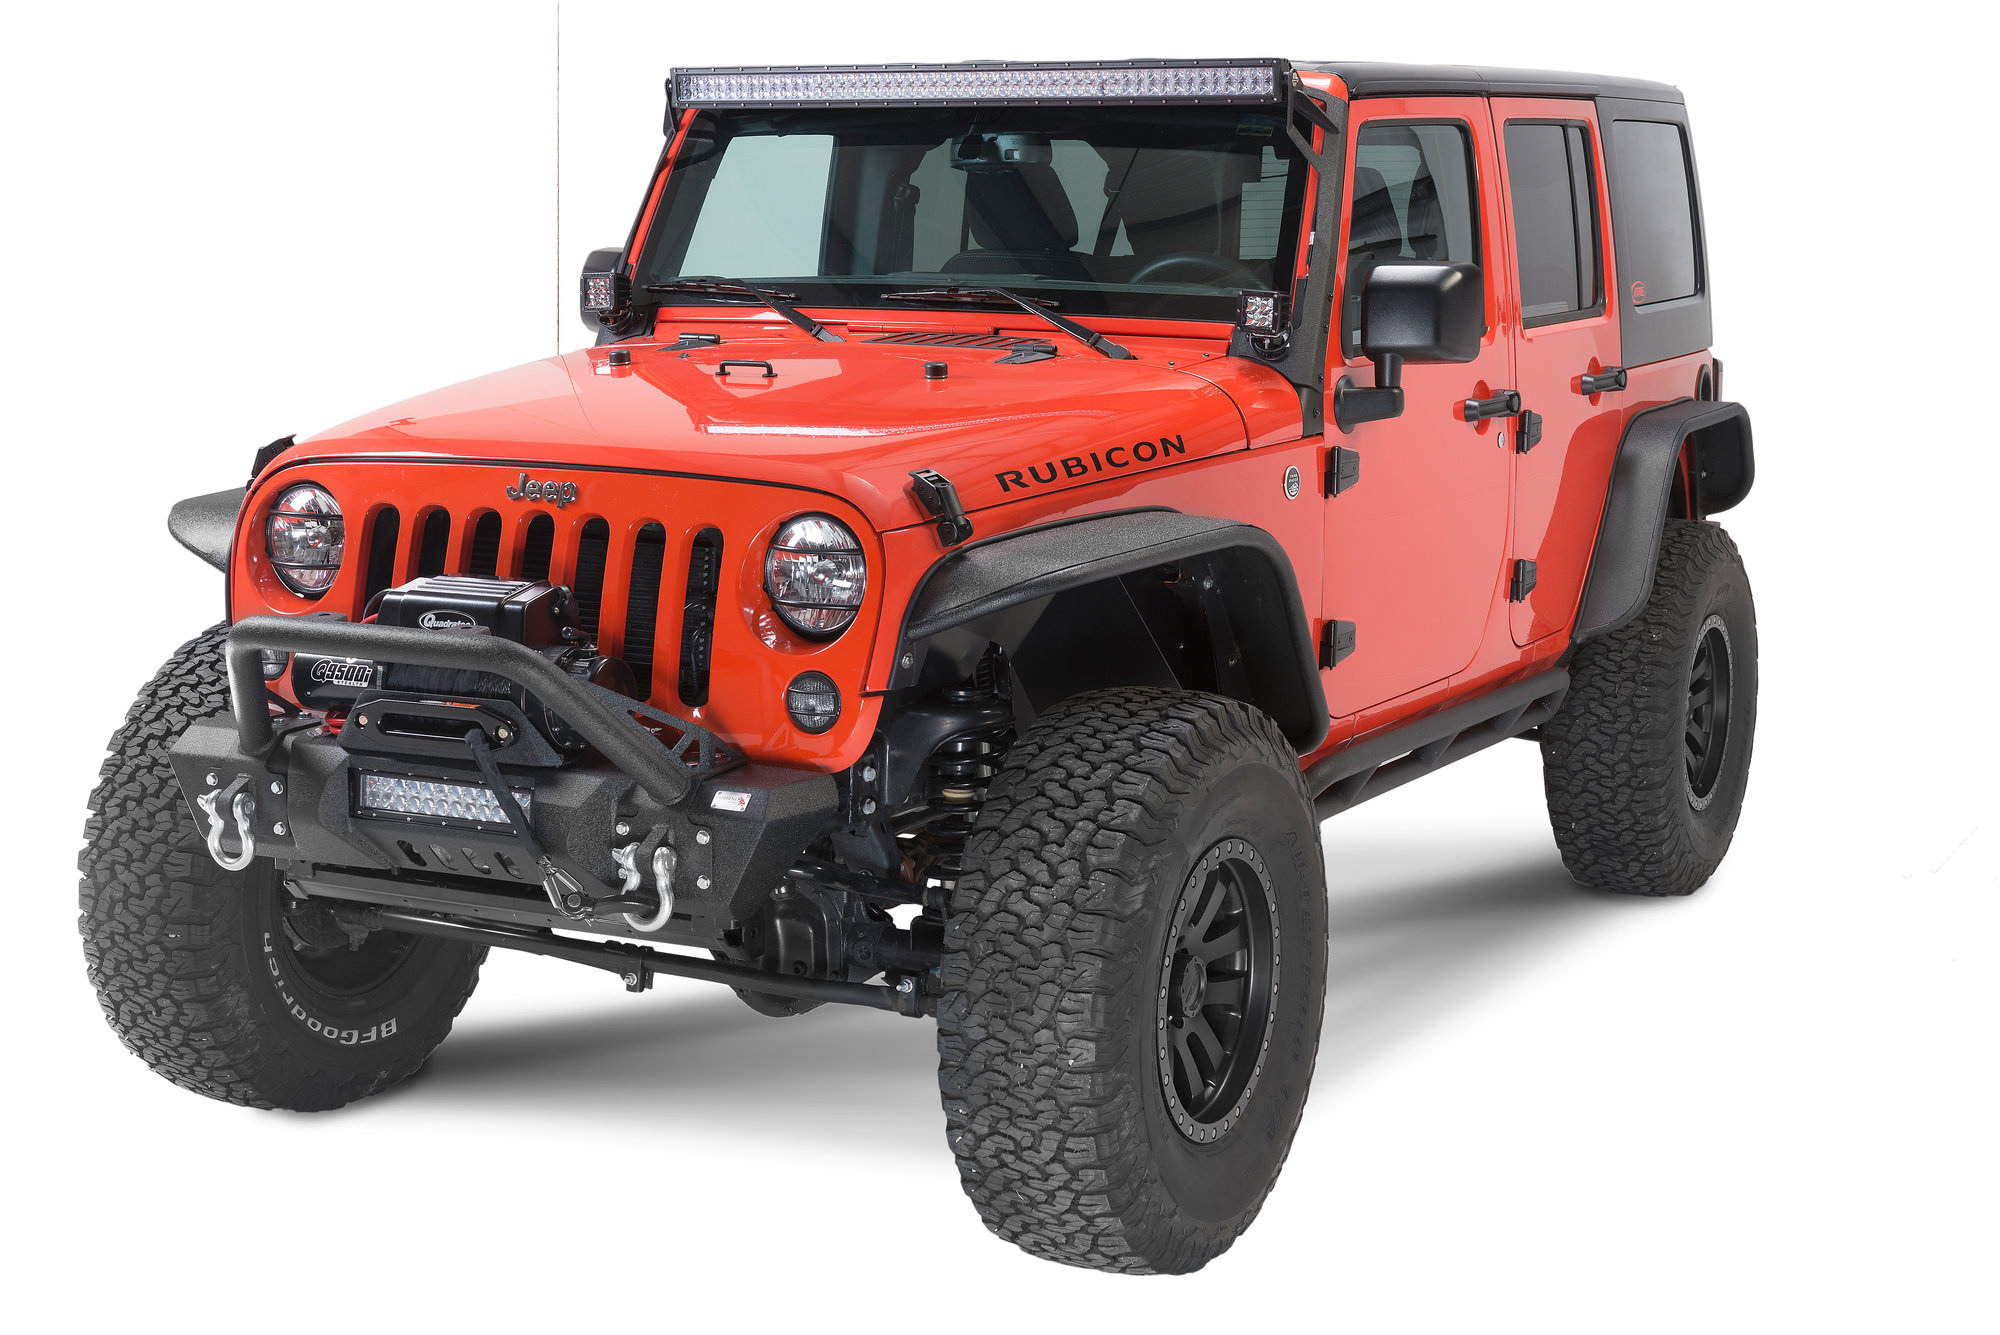 Fishbone Offroad FB22004 Front Stubby Winch Bumper with Tube Guard for  07-18 Jeep Wrangler JK | Quadratec